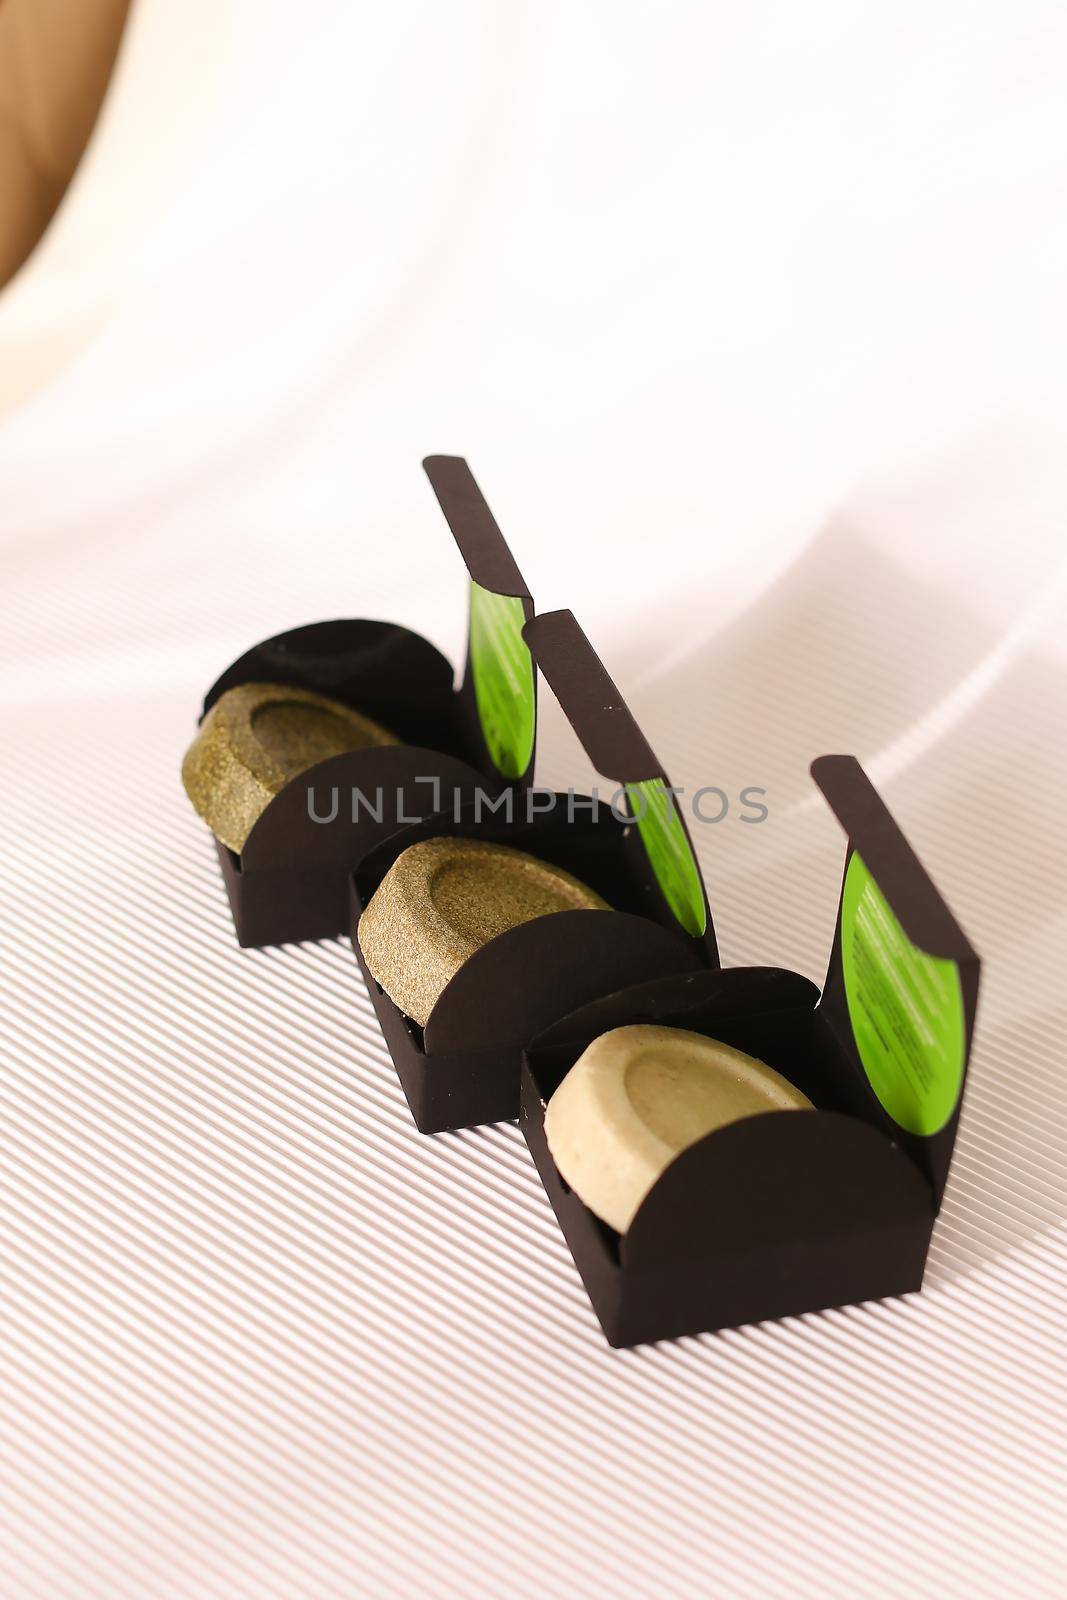 Soap solid bars in black boxes on white background. by sisterspro